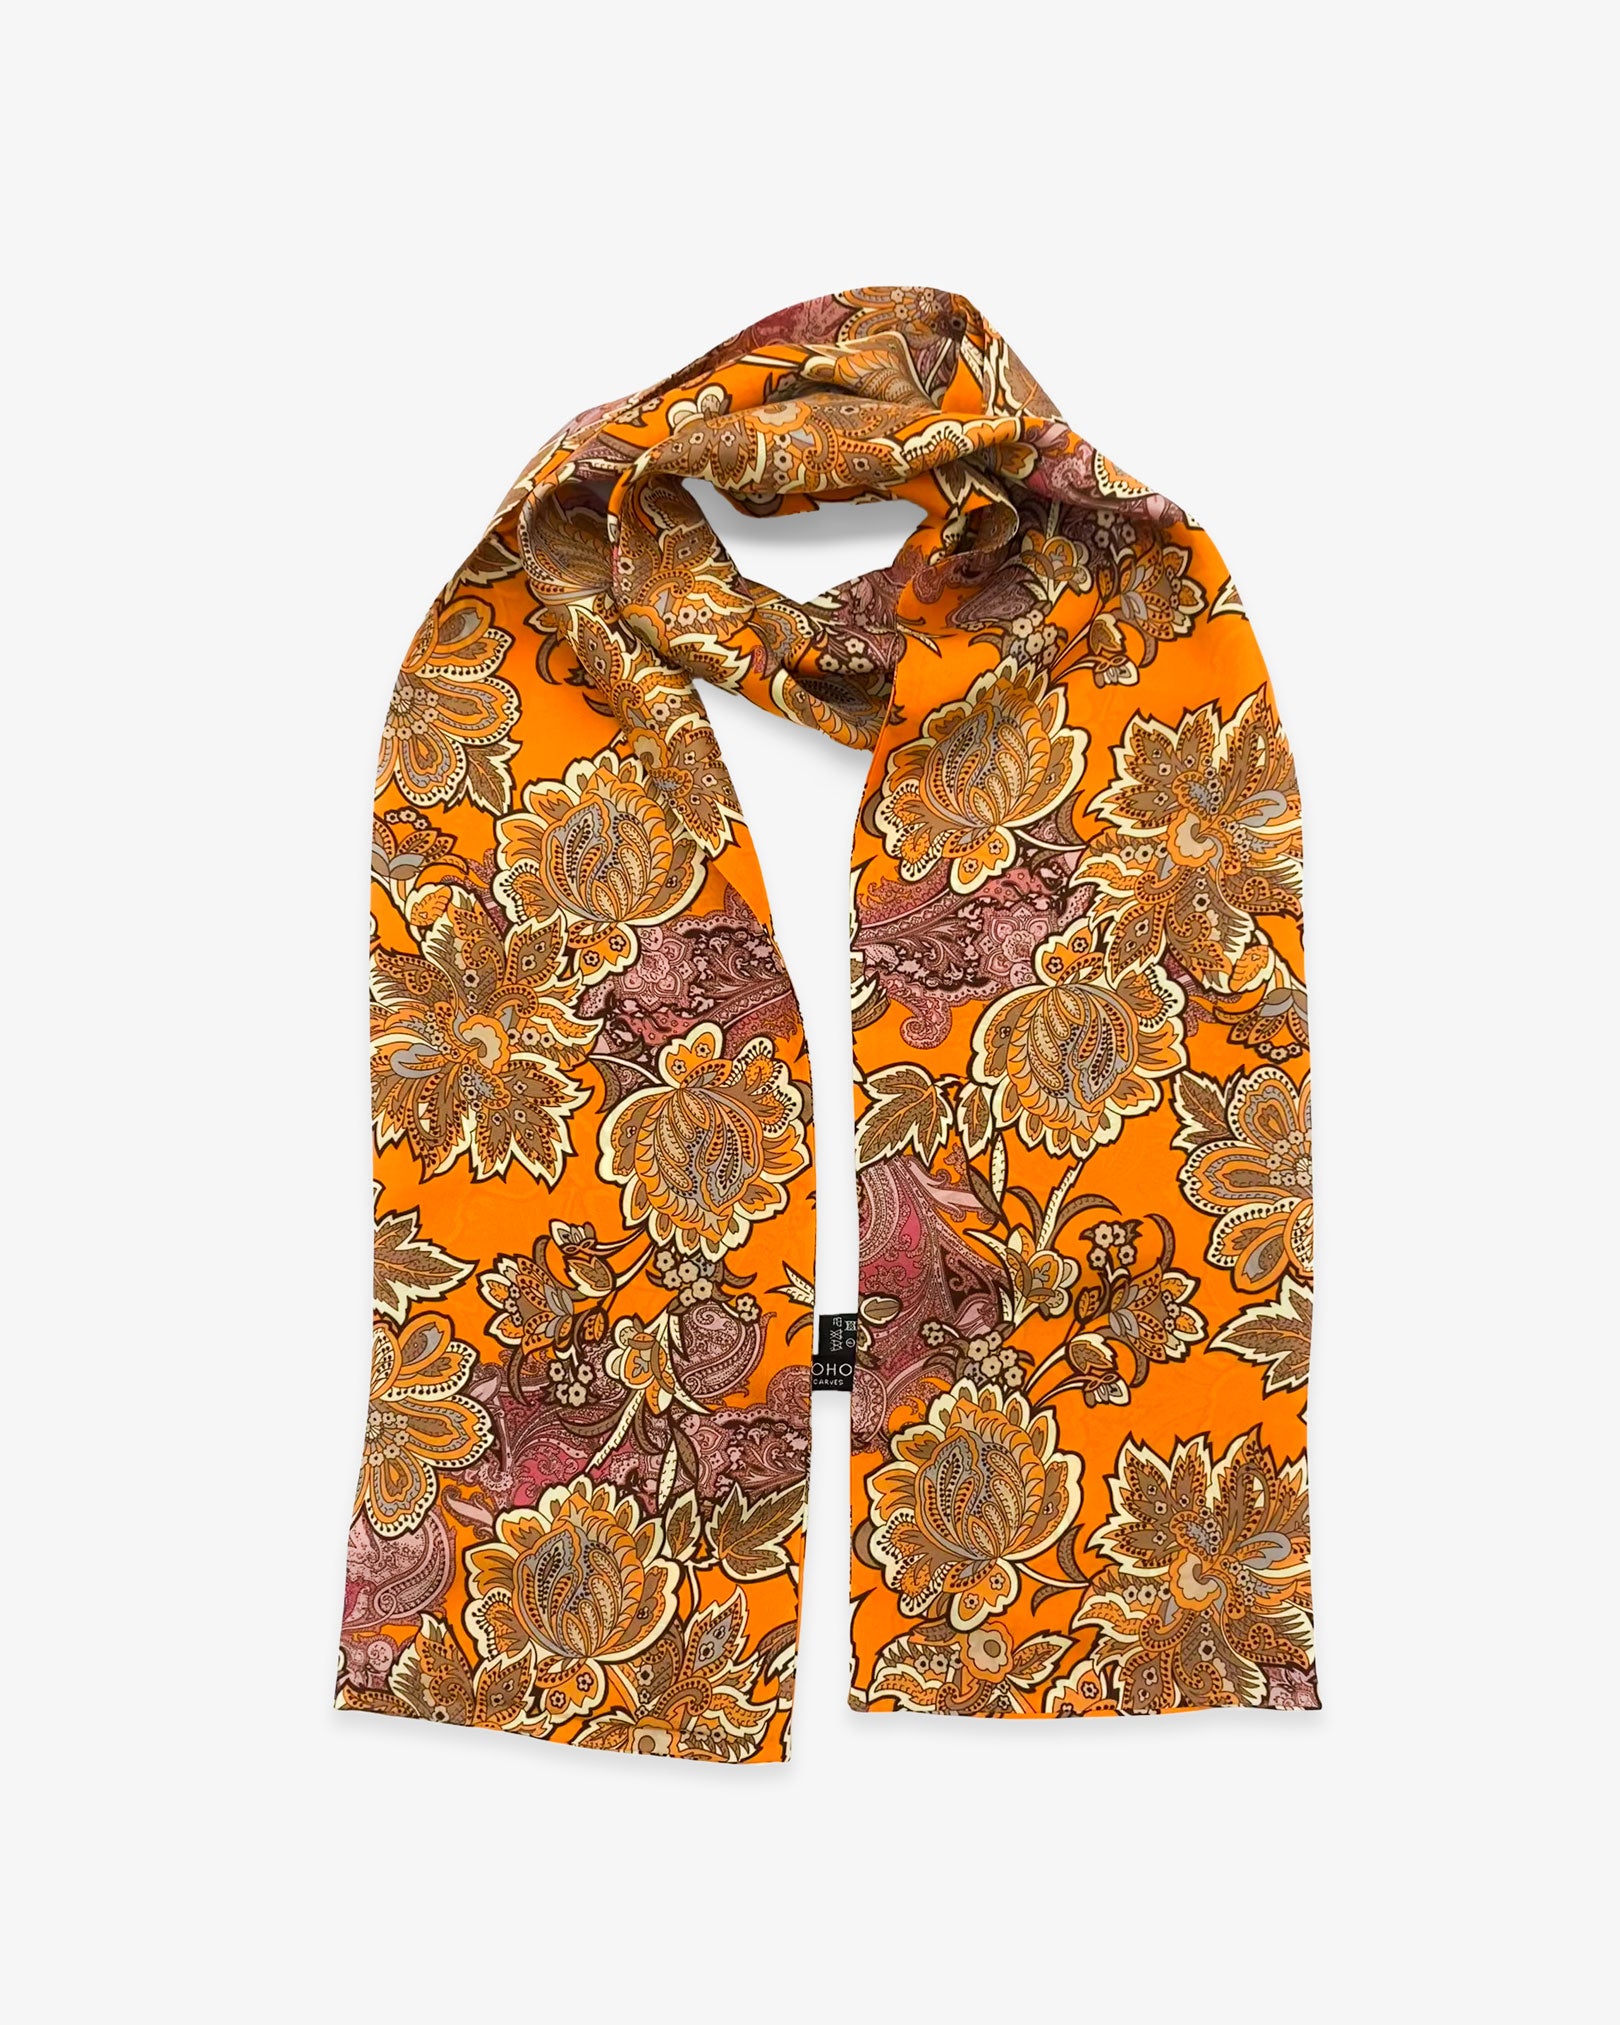 The Niagra polyester floral scarf looped in middle with both ends parallel showing vibrant, orange background. Clearly showing the repeating pink and orange floral-paisley leaves and flowers.